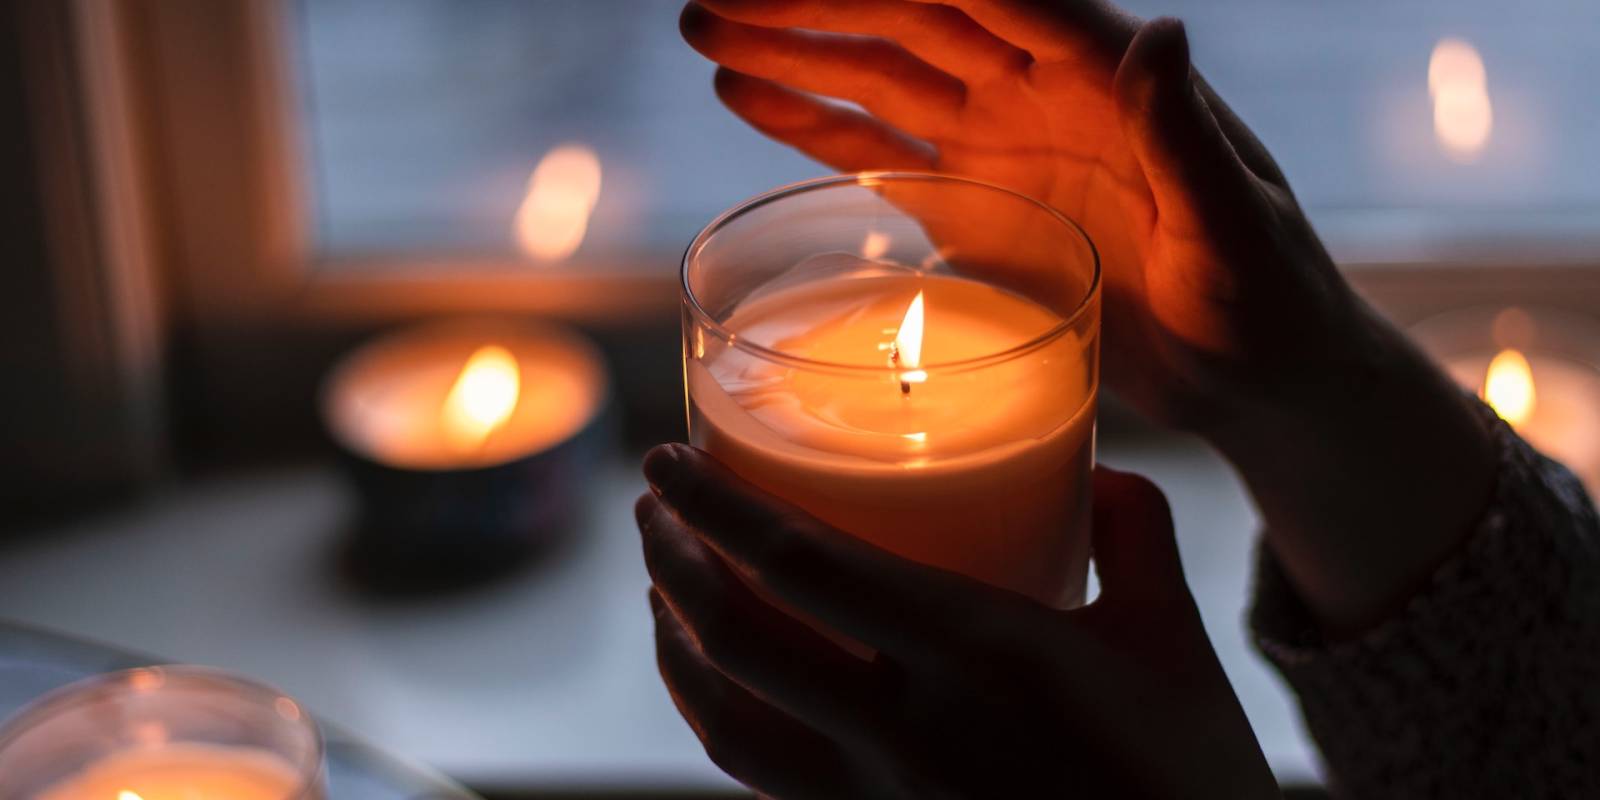 A person holding a candle